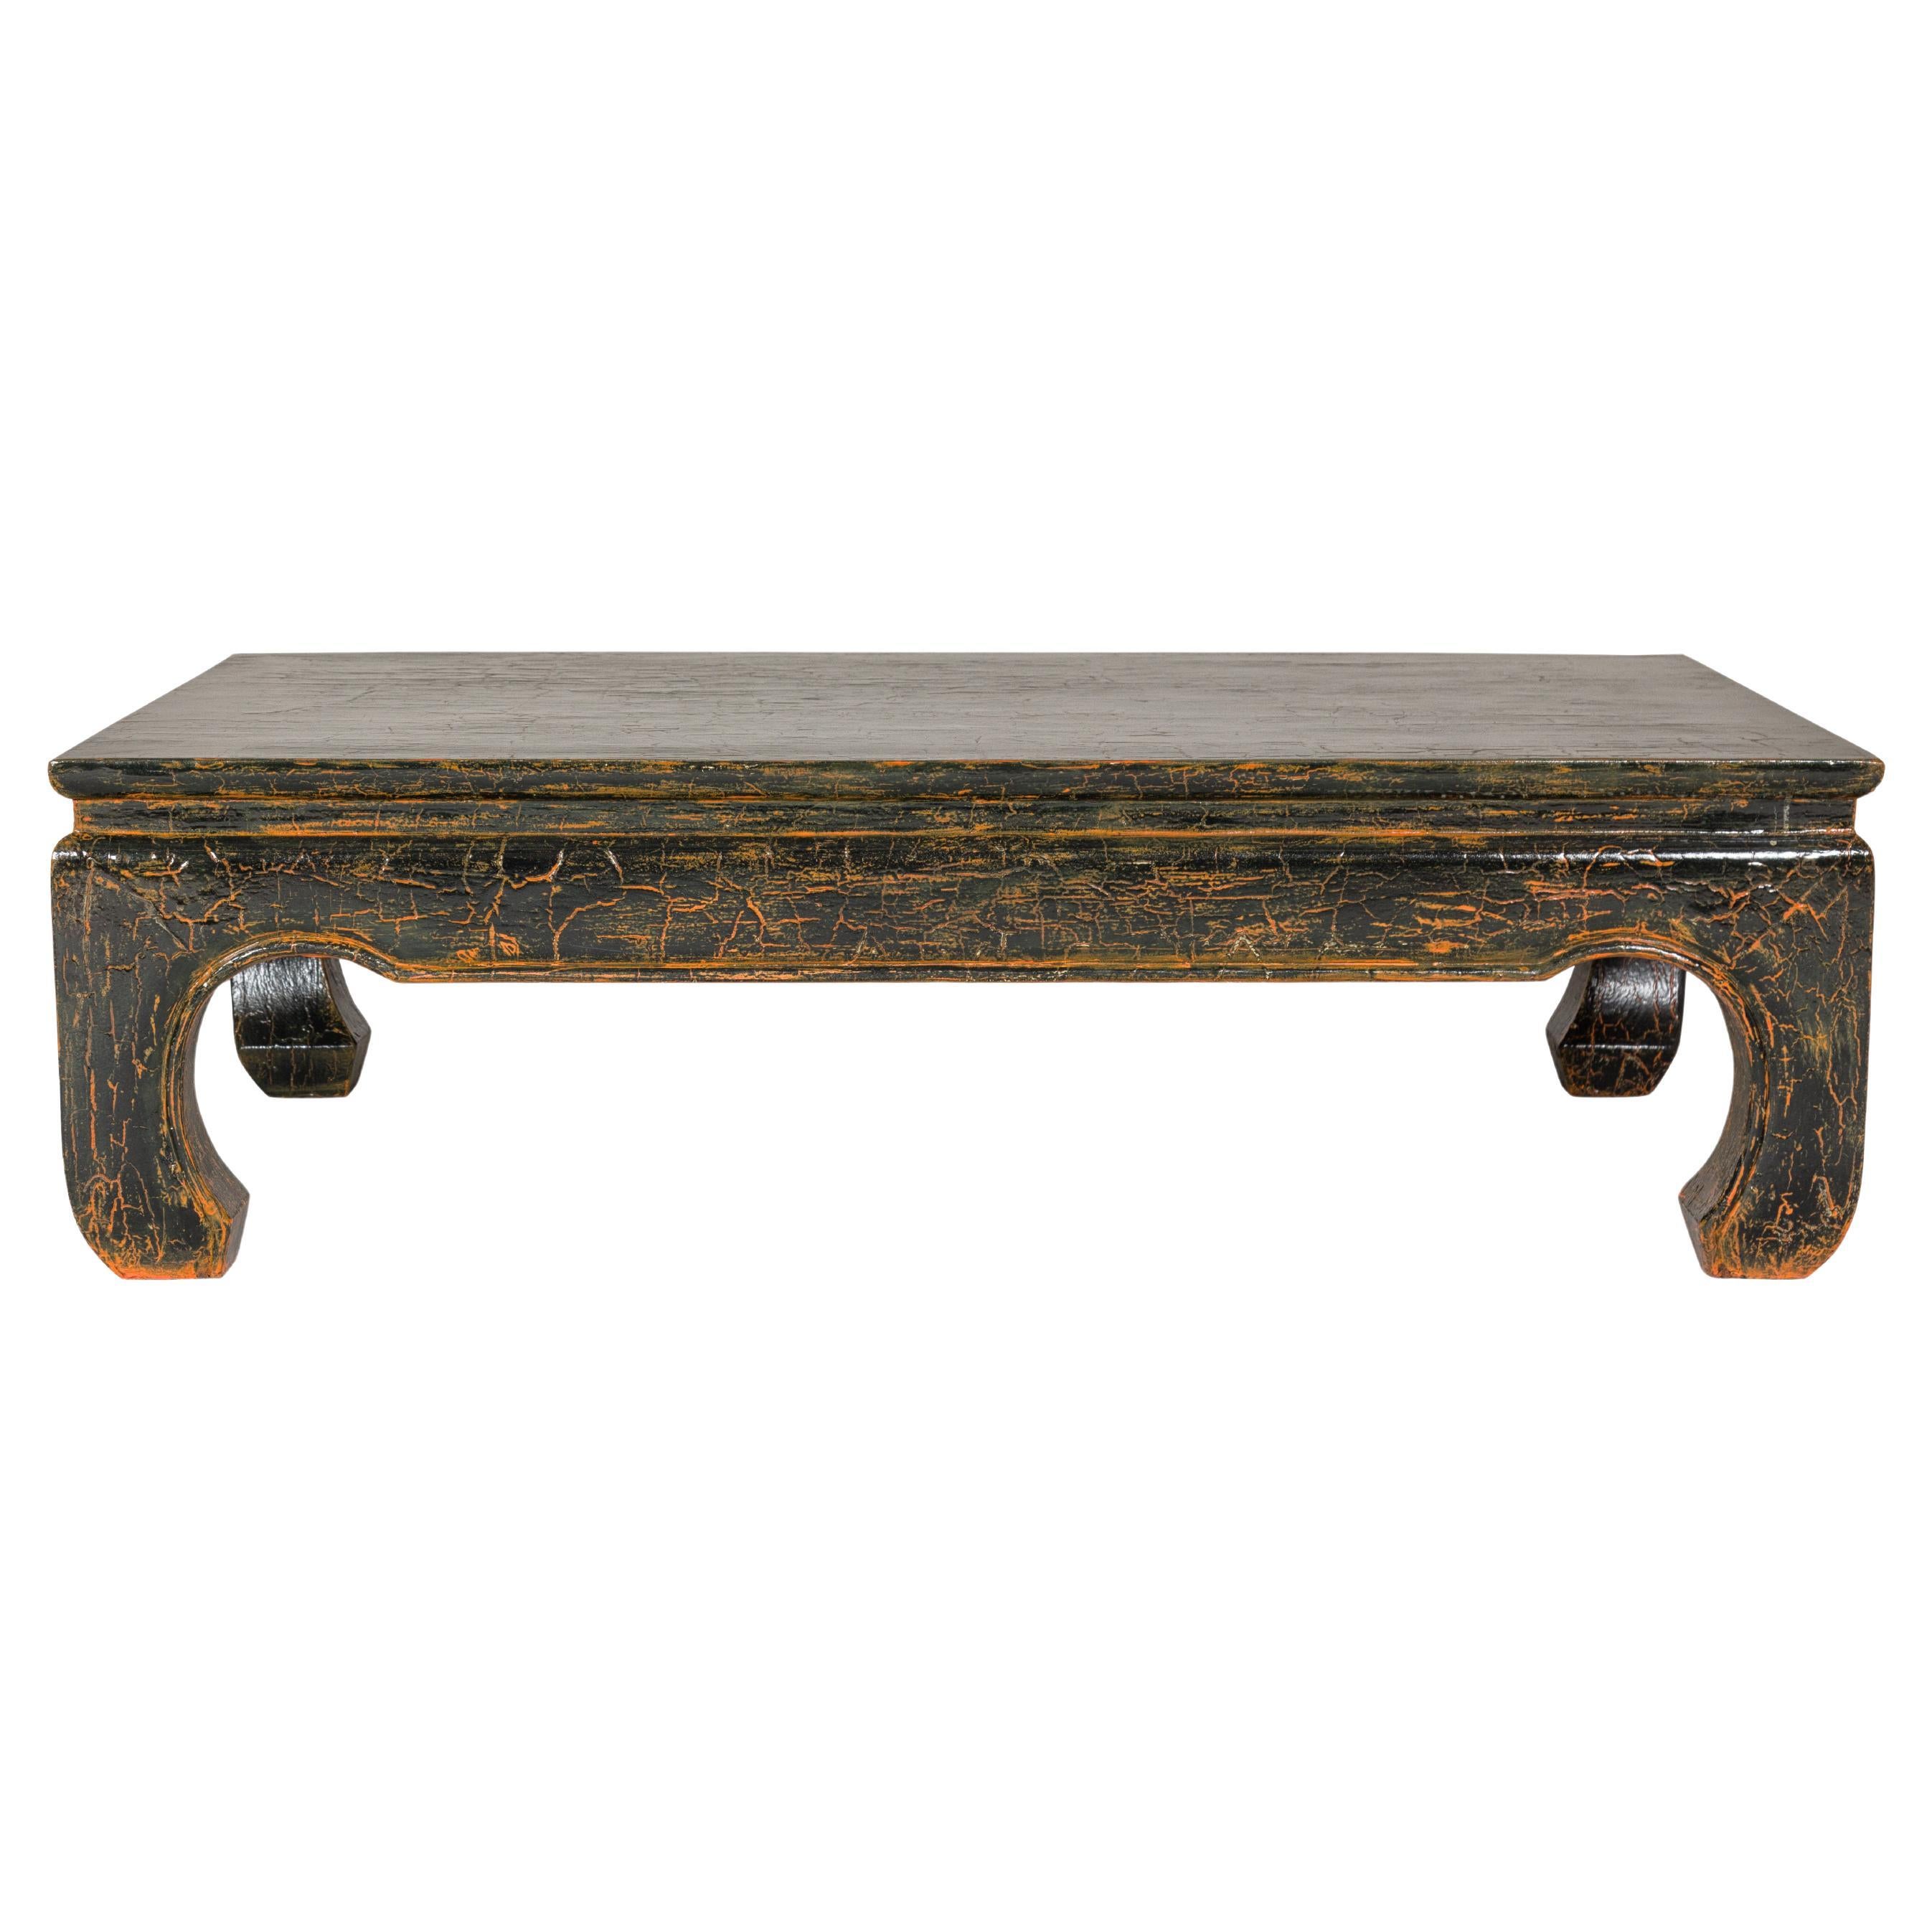 Vintage Chow Legs Distressed Black Coffee Table with Crackle Orange Finish For Sale